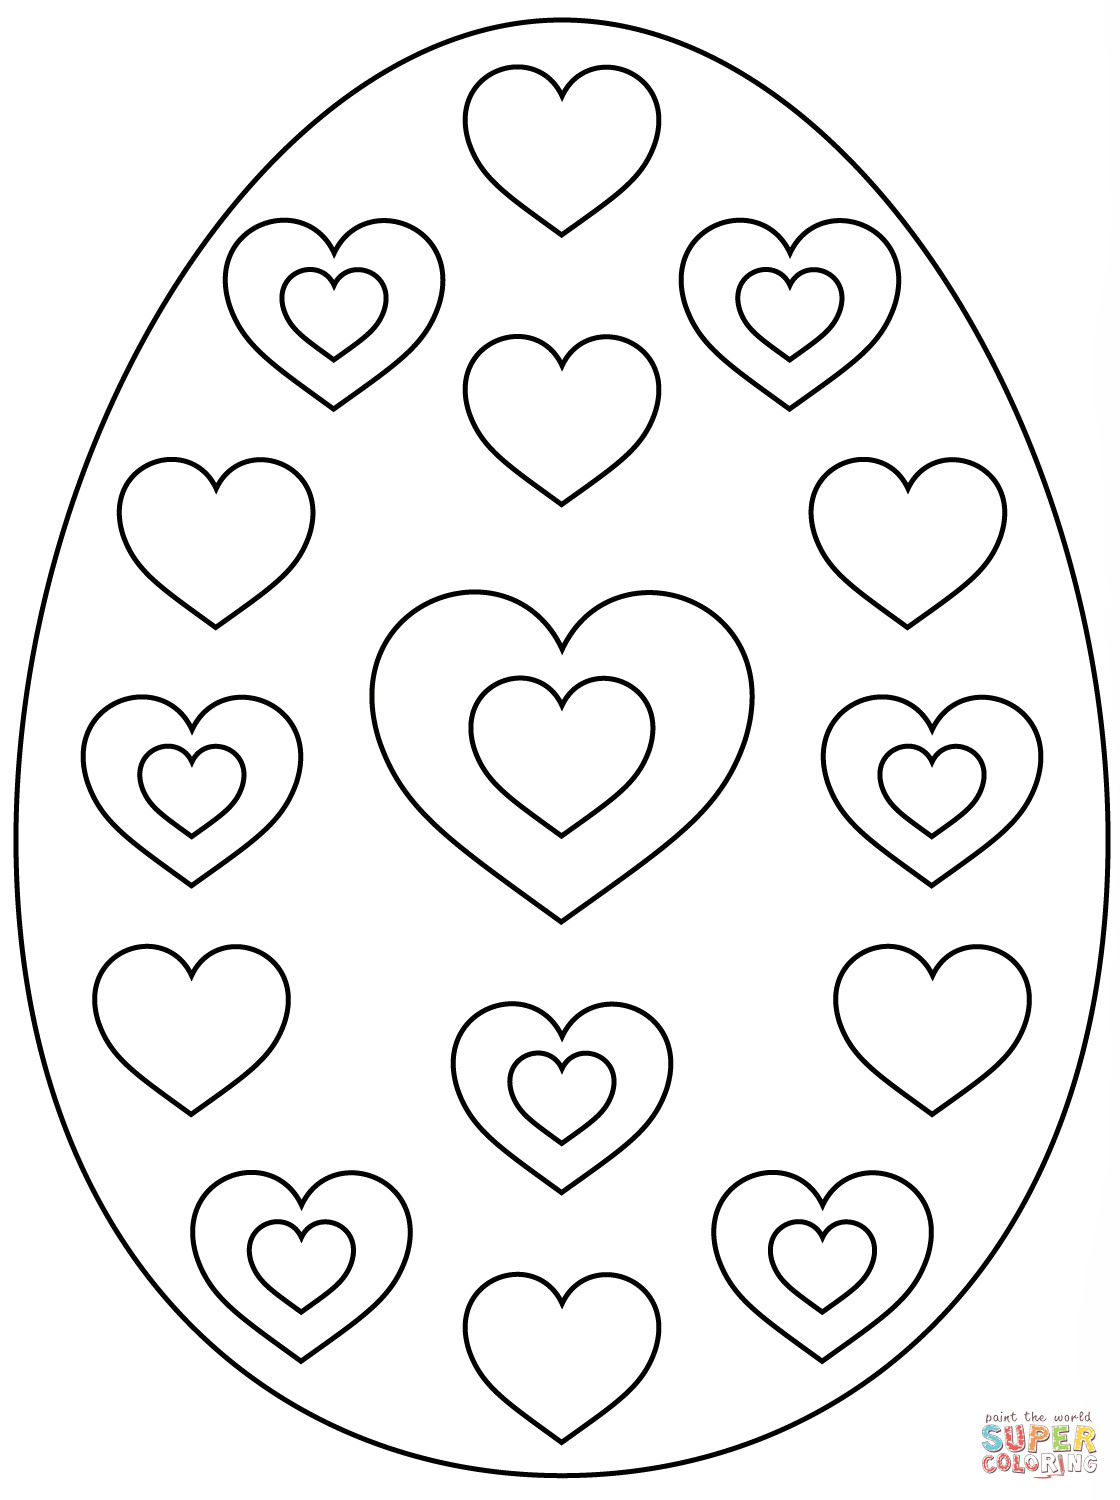 Free Printable Easter Egg Coloring Pages
 Easter Egg with Hearts coloring page